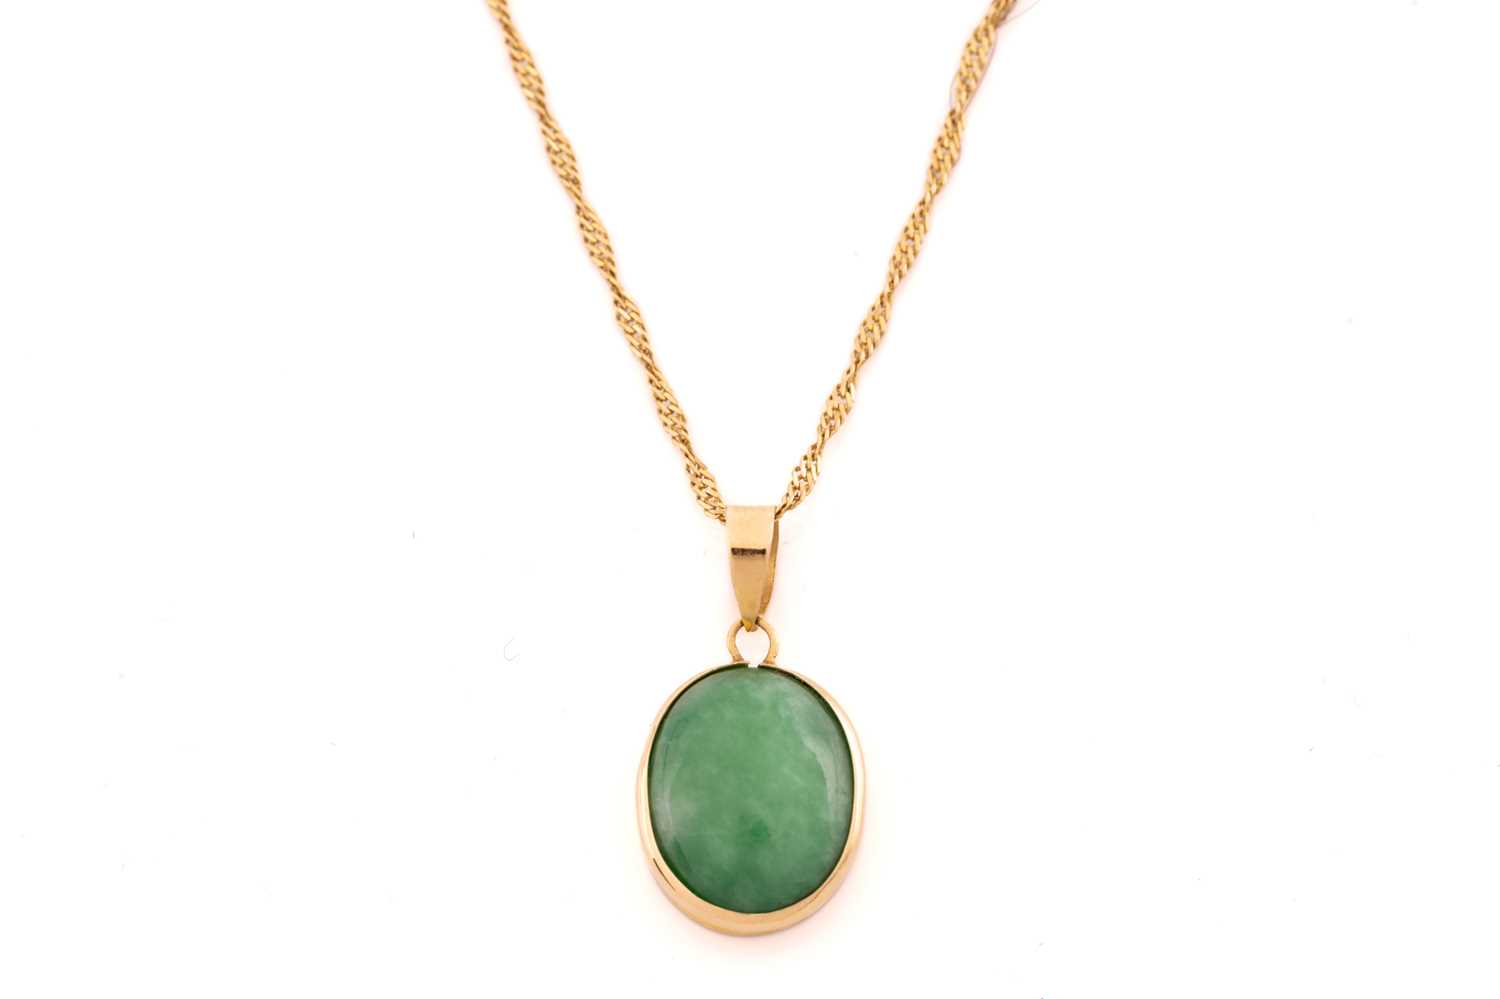 A jade pendant on chain with a pair of stud earrings in 18ct yellow gold; the pendant contains an - Image 3 of 10